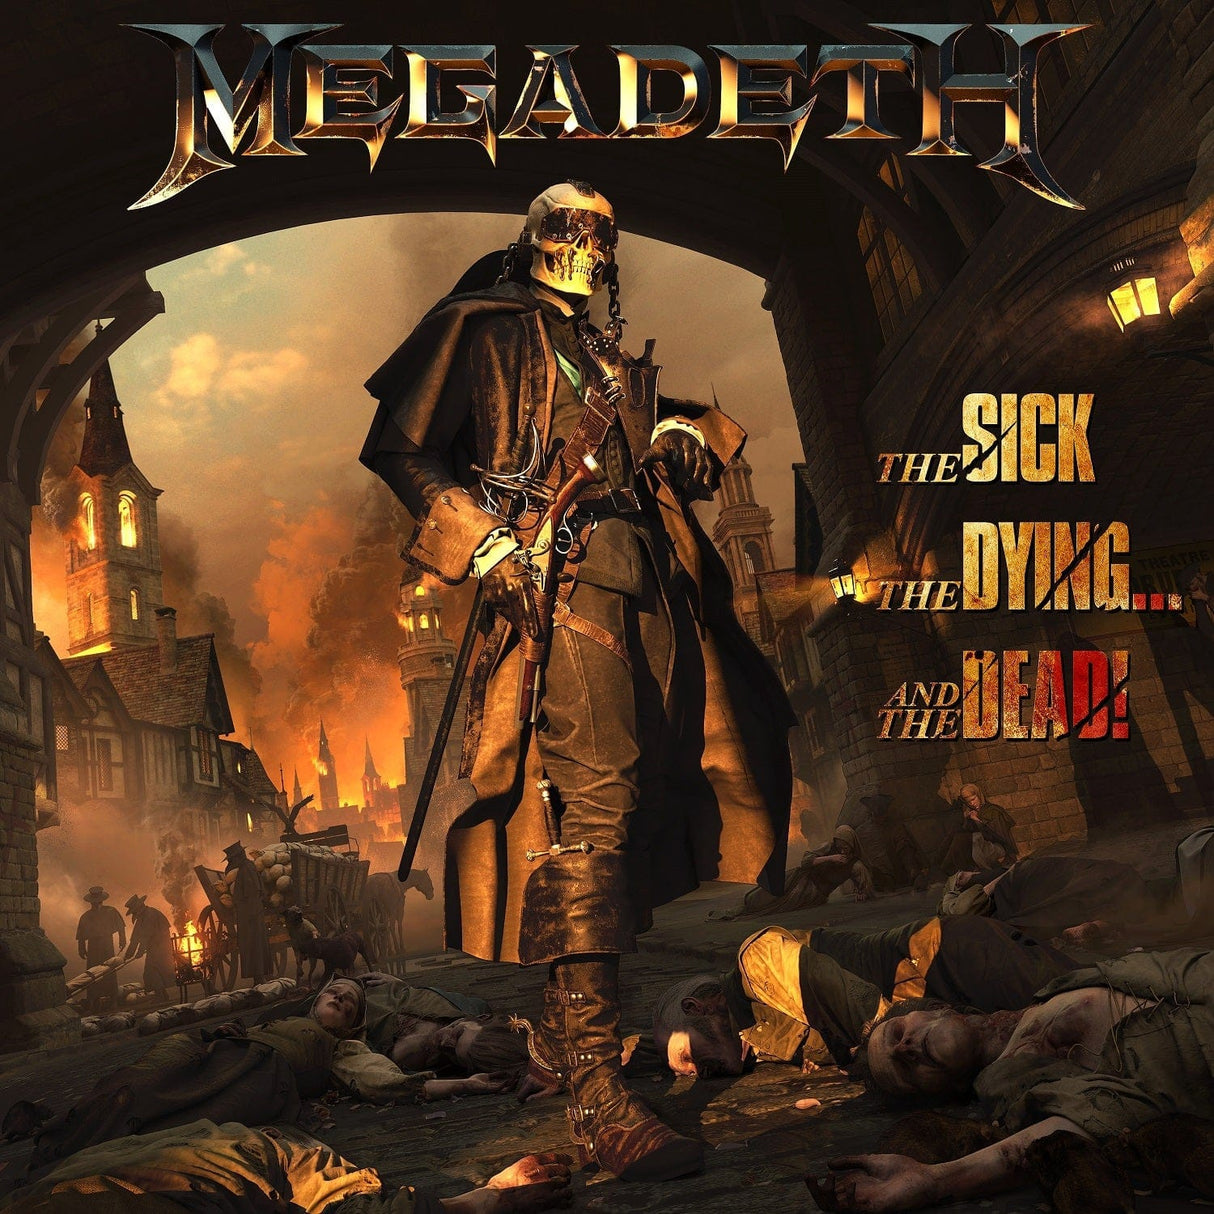 Megadeth The Sick, The Dying… And The Dead! [Deluxe 2 LP/7" Single] Vinyl - Paladin Vinyl